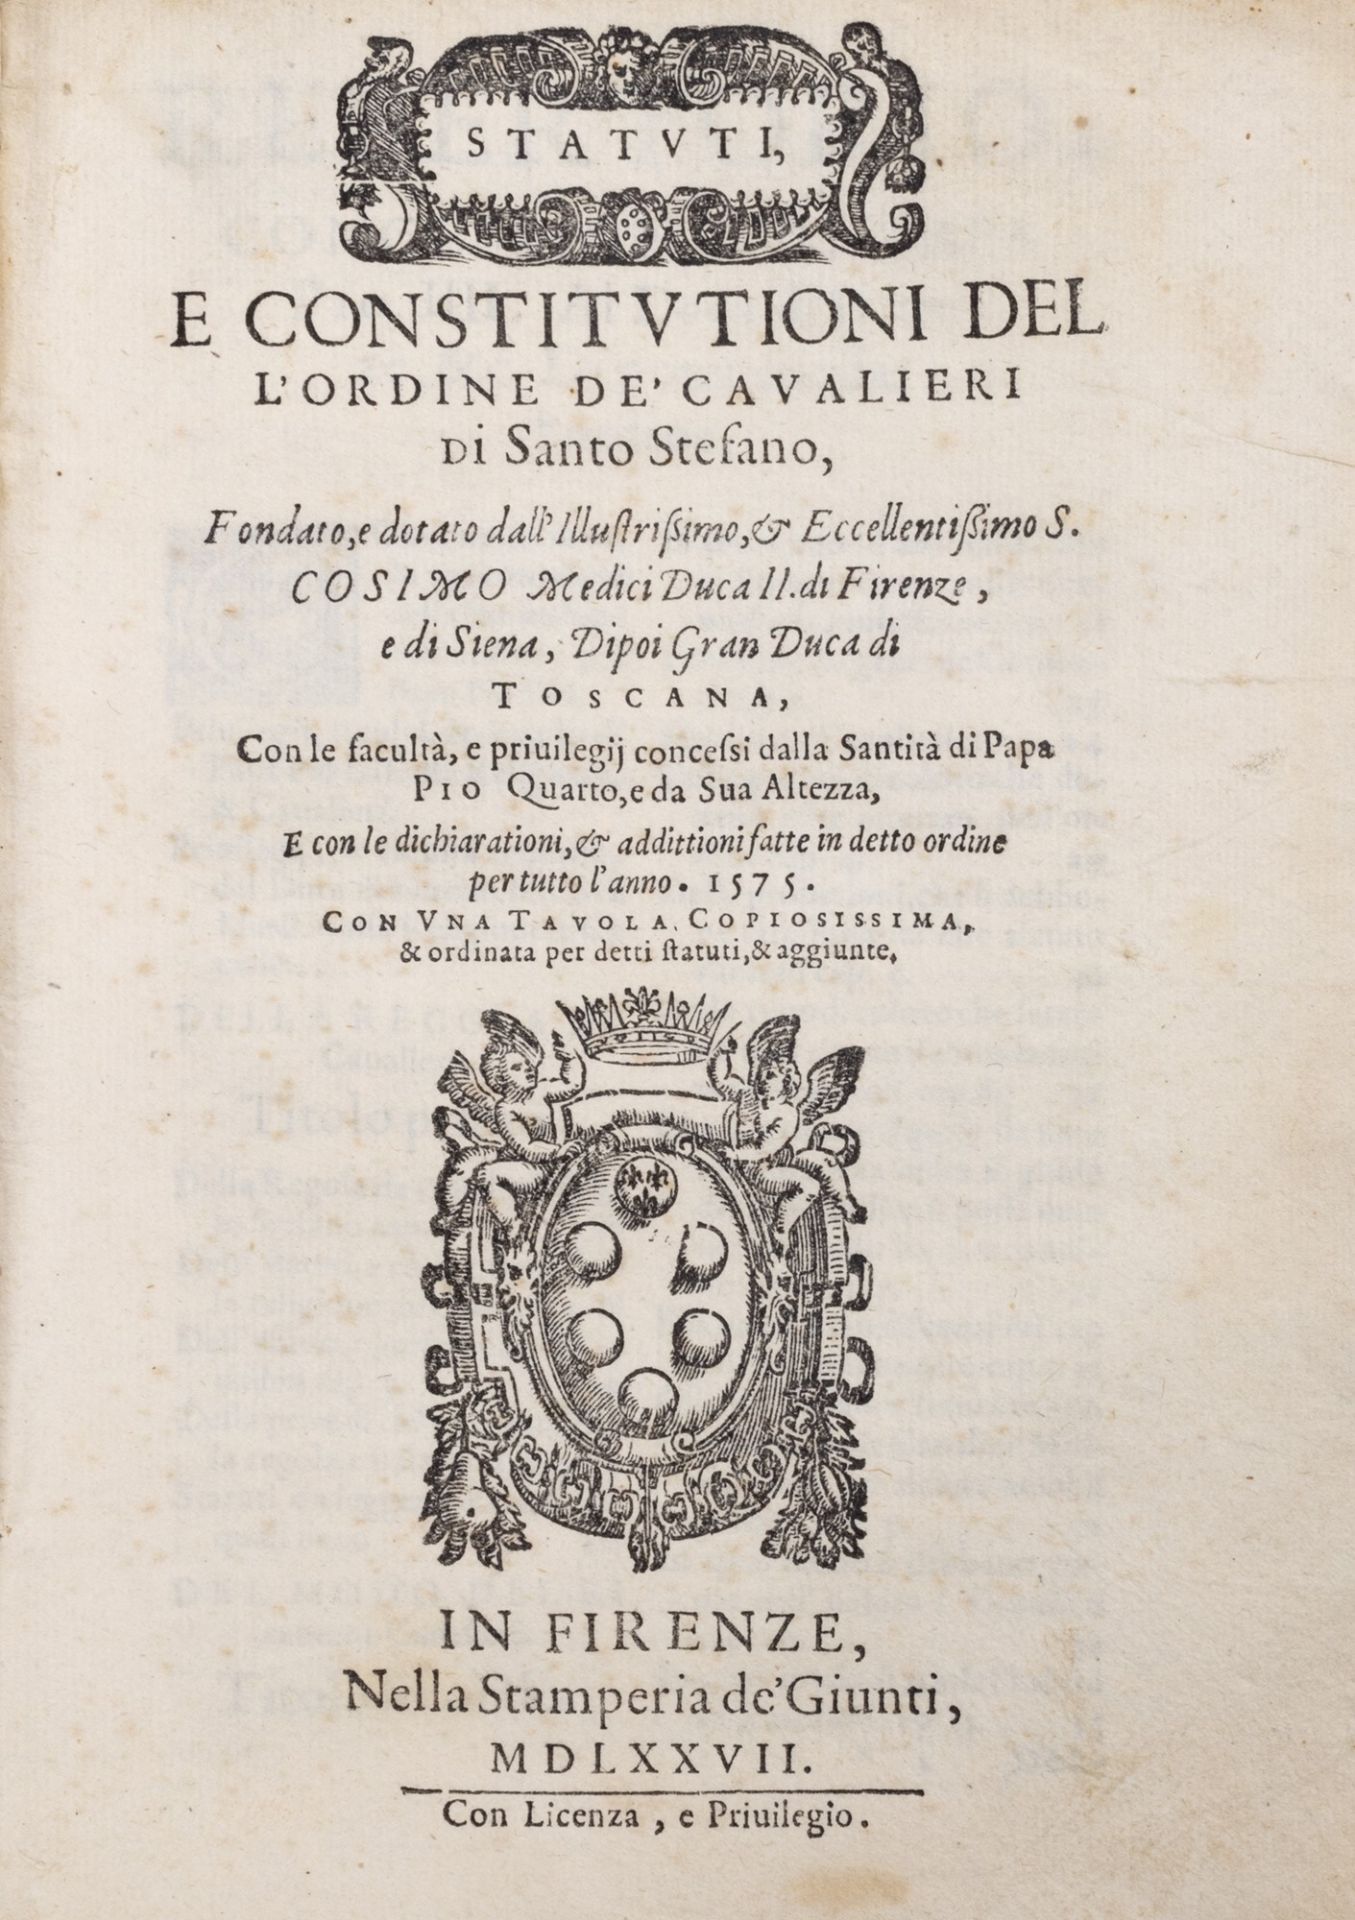 Cavalieri di Santo Stefano - Statutes, and constitutions of the Order of the Knights of Santo Stefan